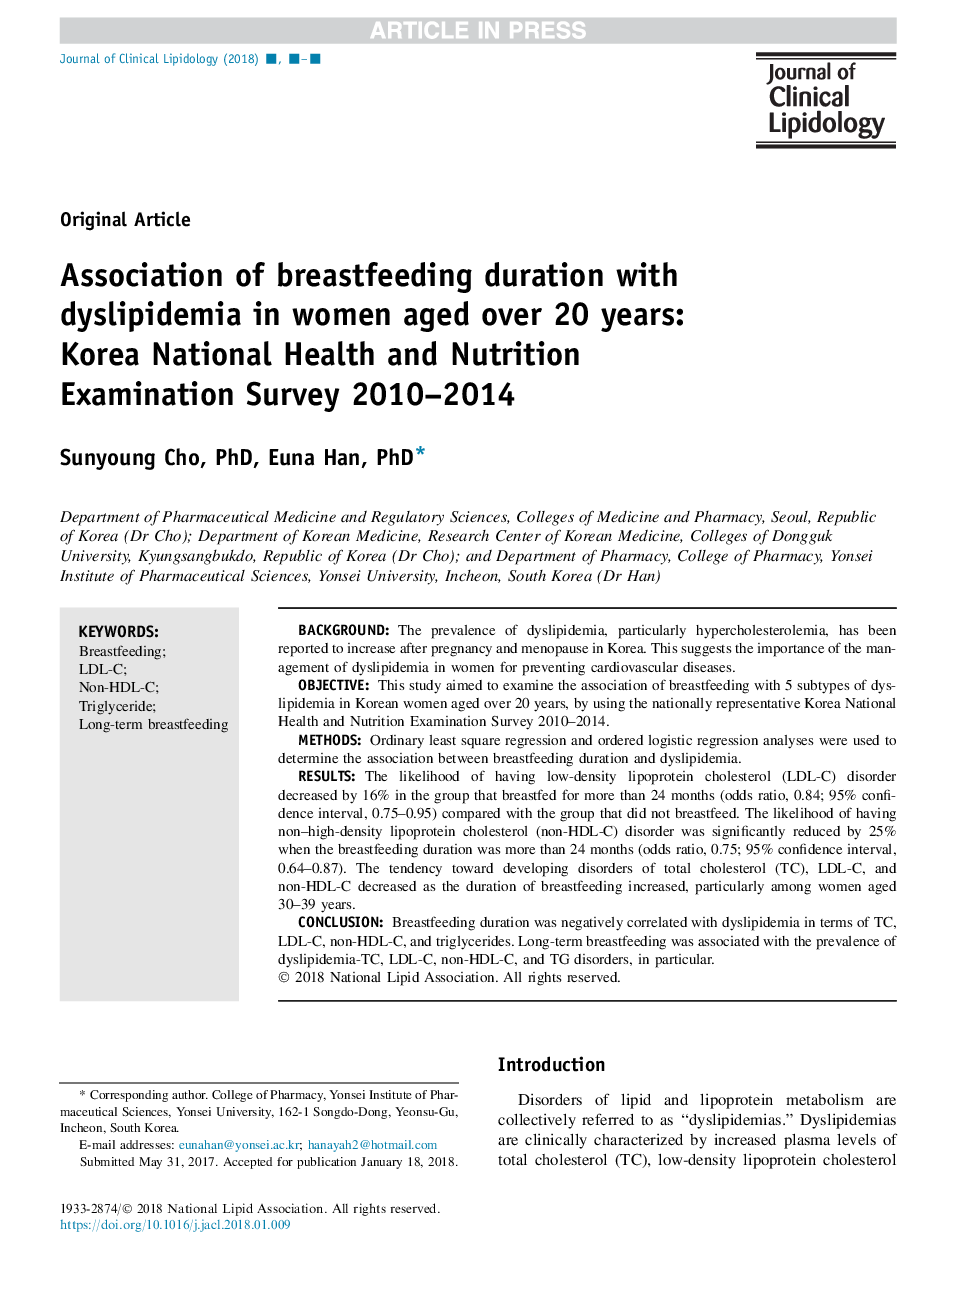 Association of breastfeeding duration with dyslipidemia in women aged over 20Â years: Korea National Health and Nutrition Examination Survey 2010-2014